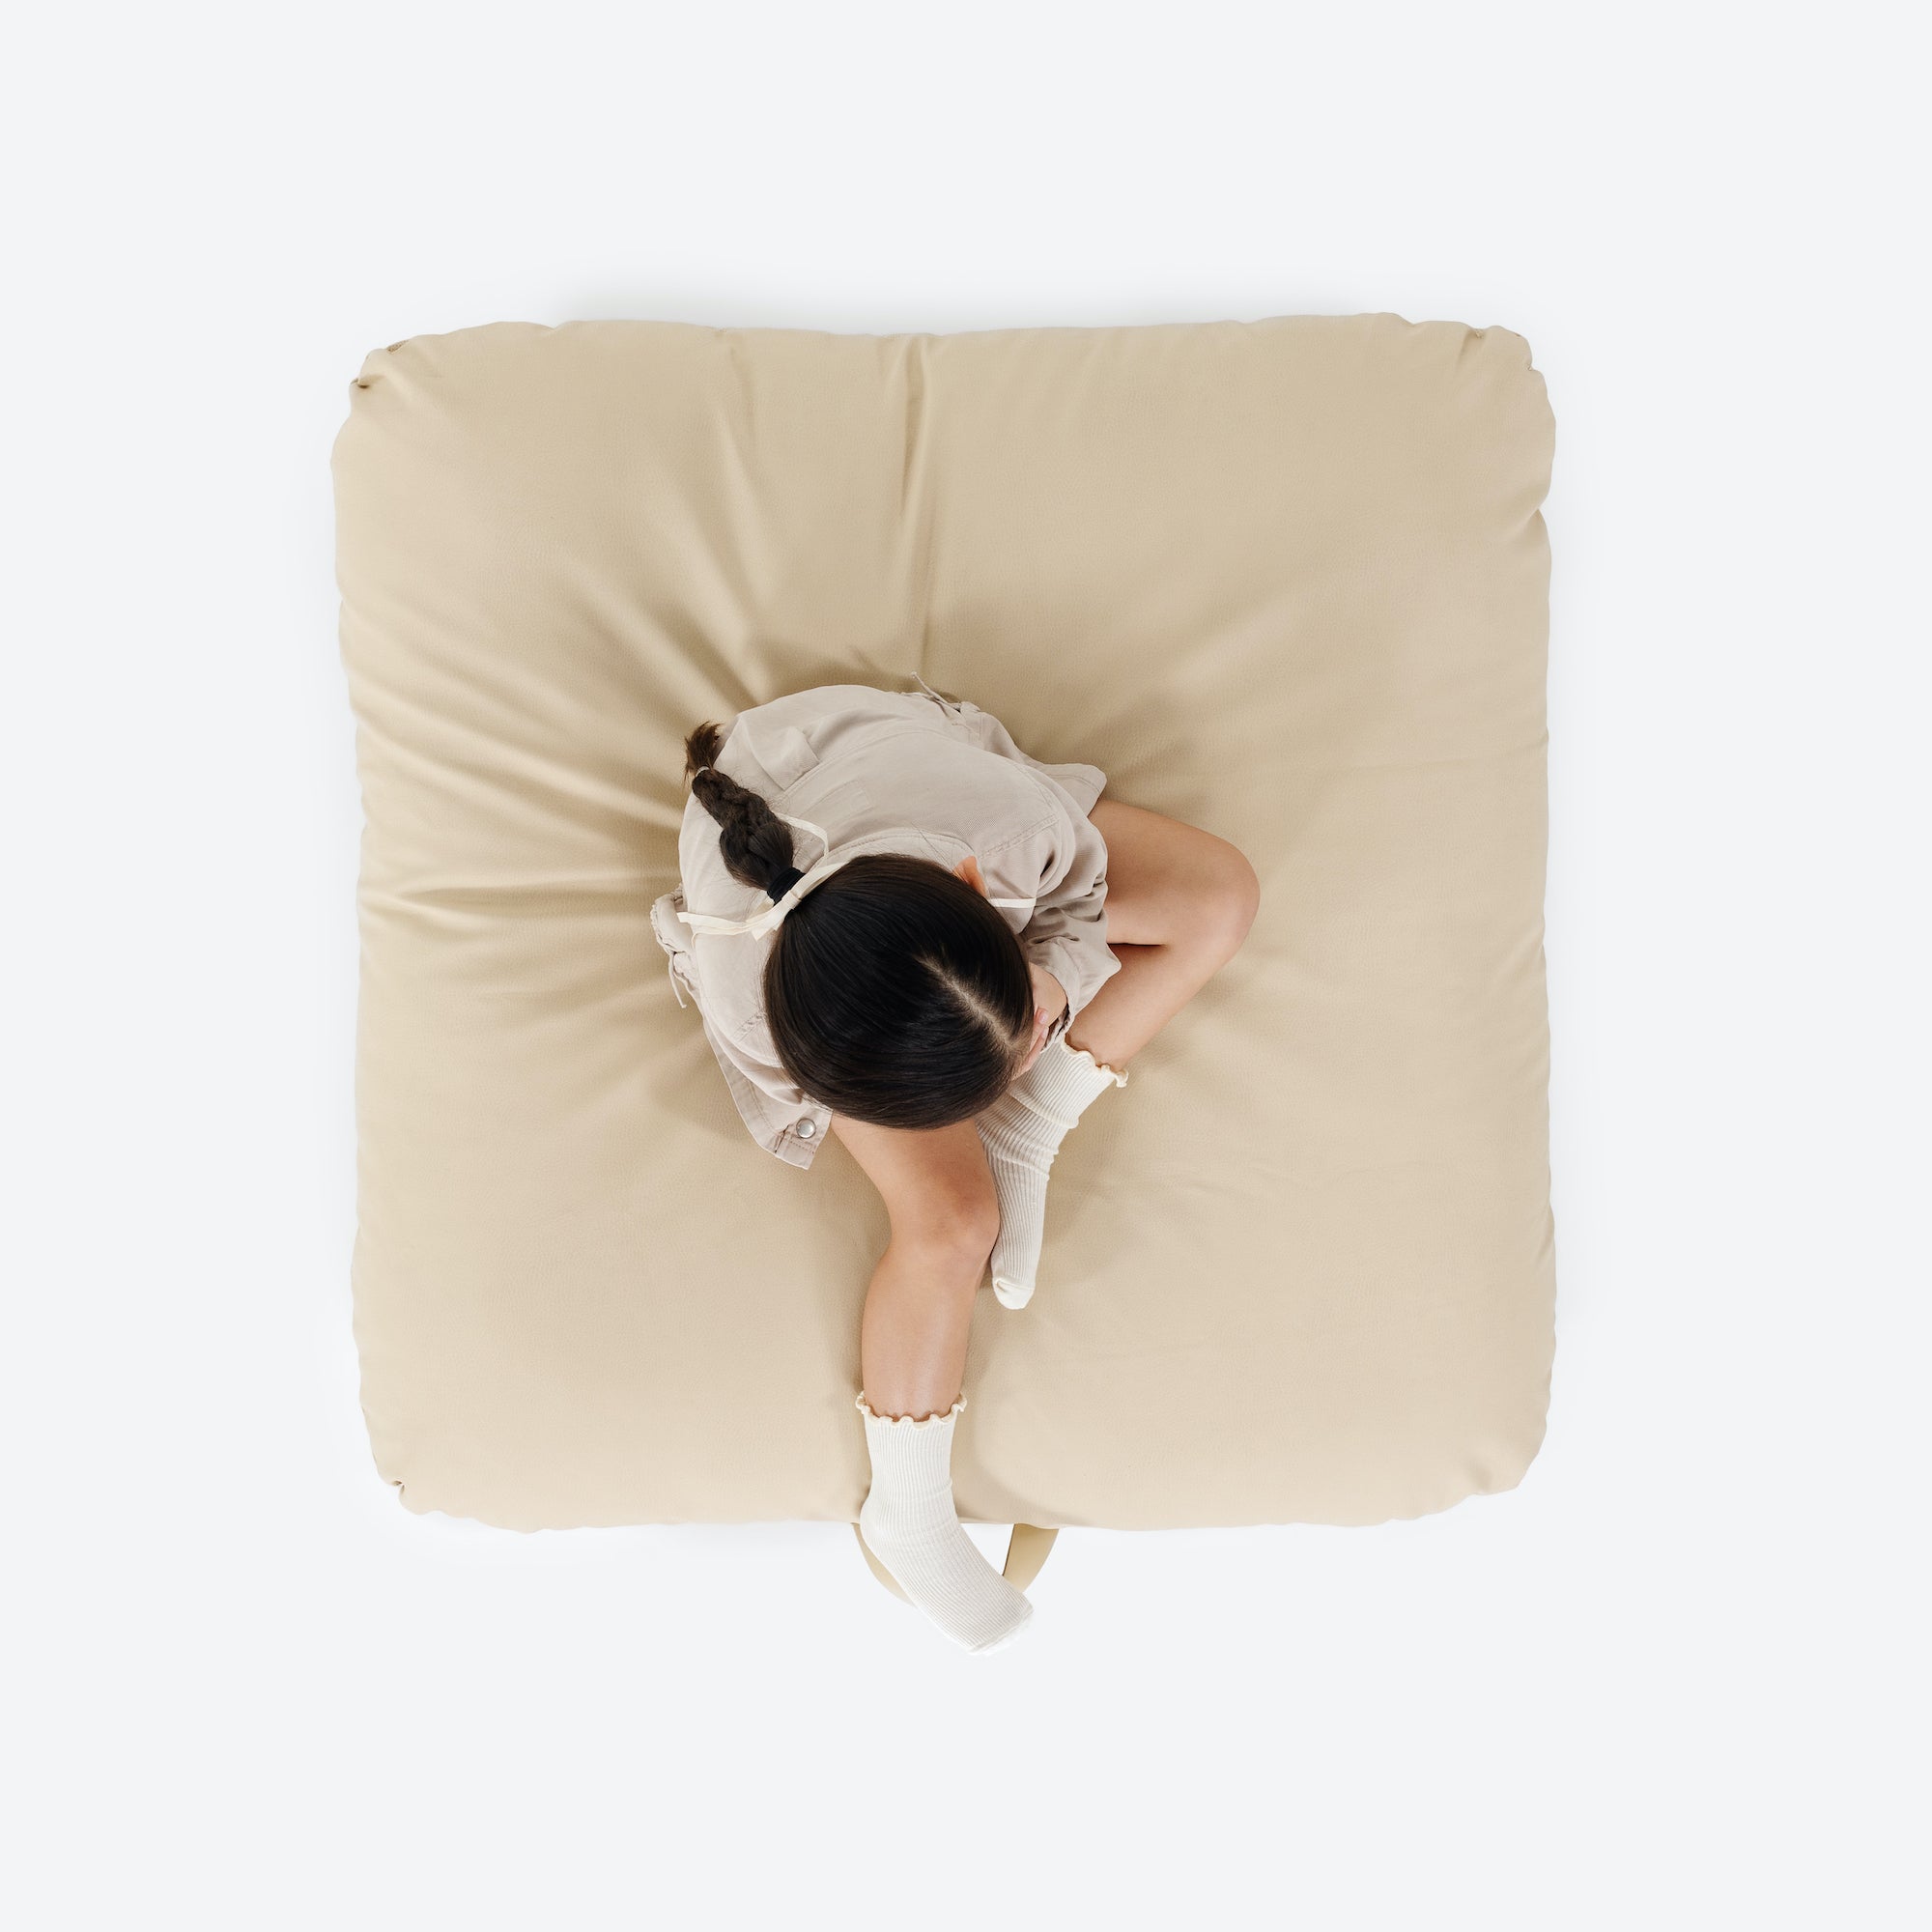 Créme / Square@overhead of girl sitting on cushion